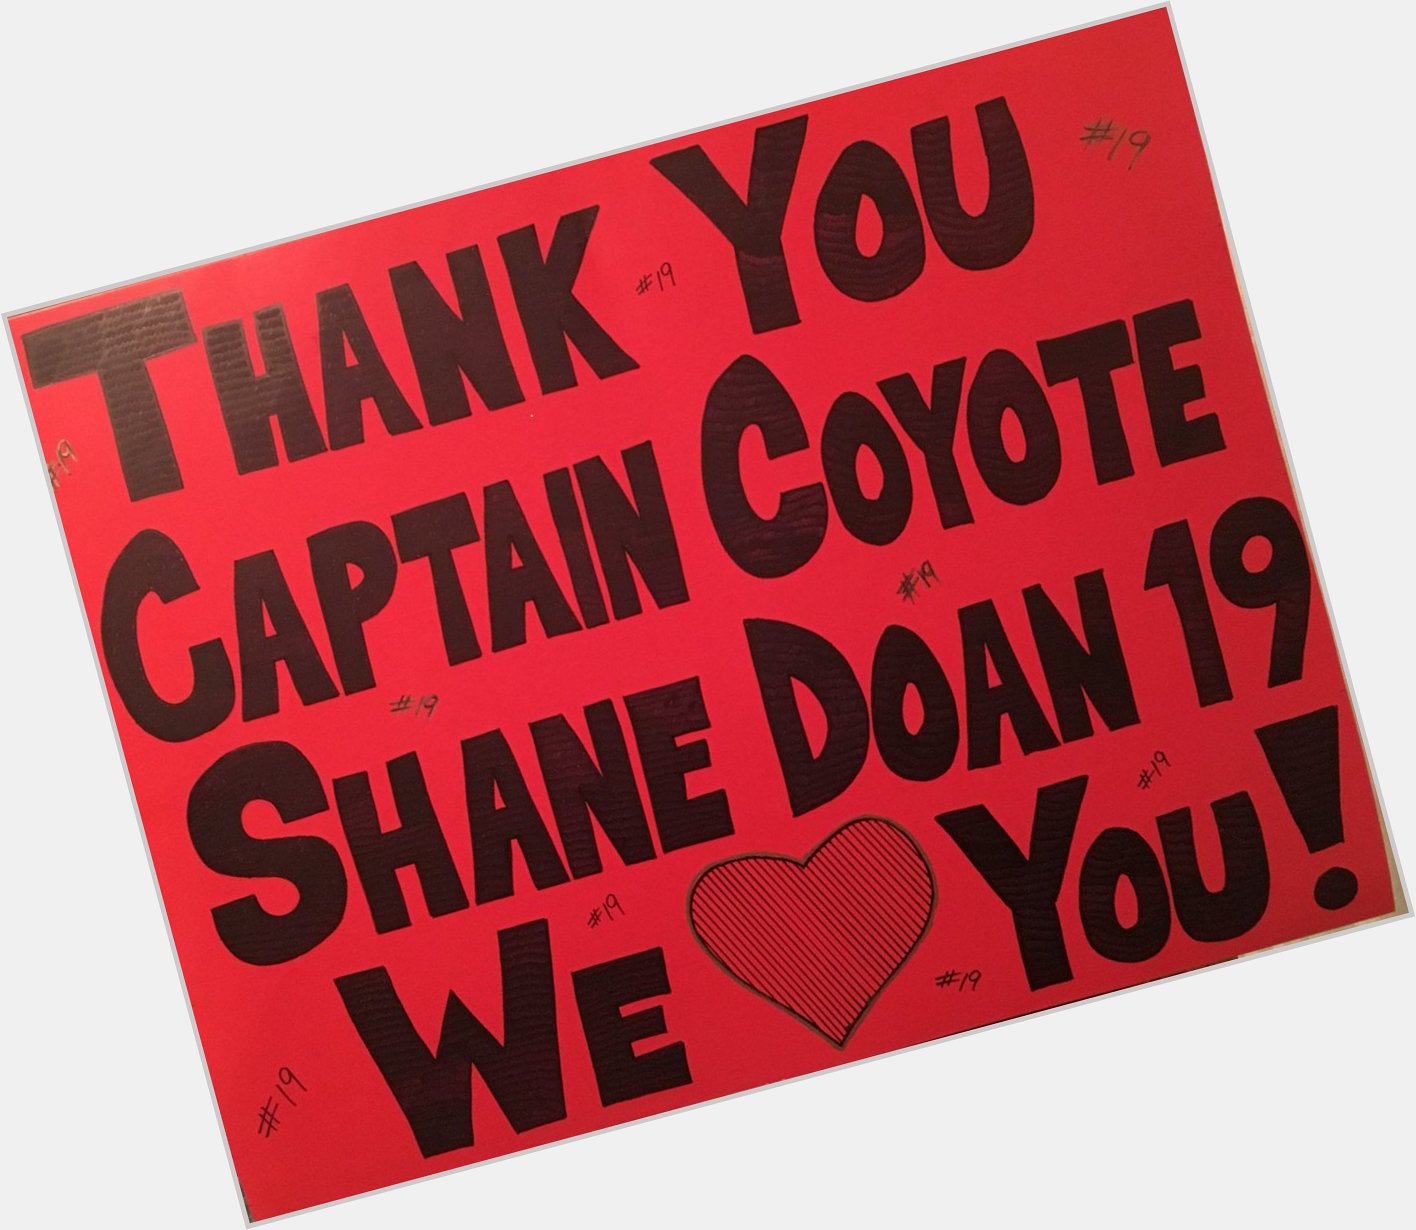  was extremely lucky to call you our Captain! 
Happy Birthday Shane Doan, hope you have a fantastic day! 